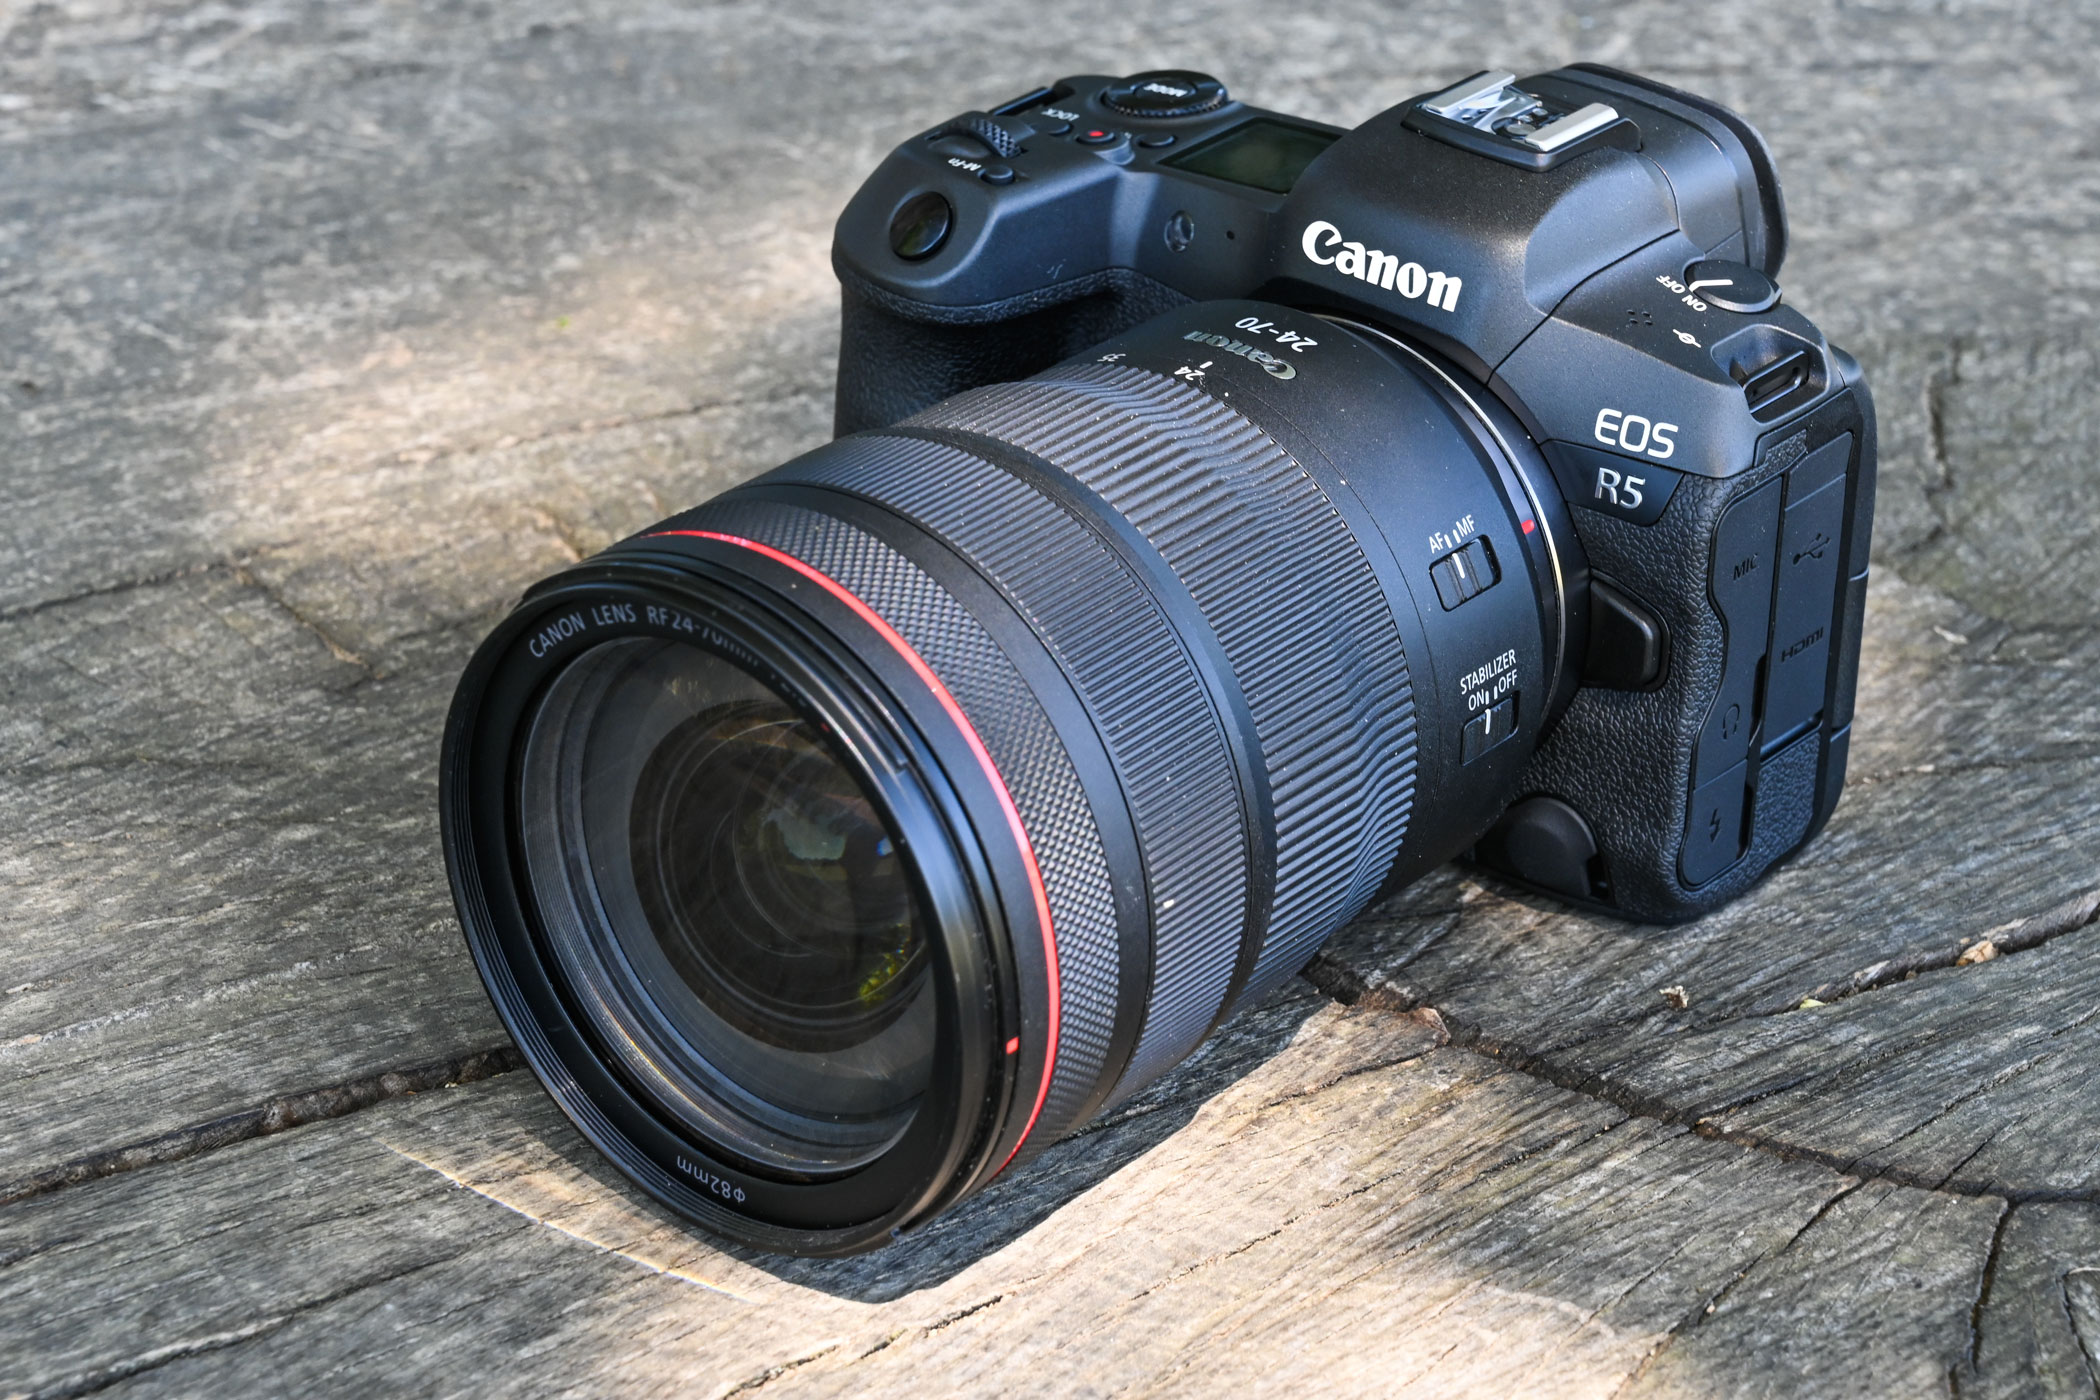 Canon claims that the IBIS provides up to 8 stops stabilisation with selected lenses